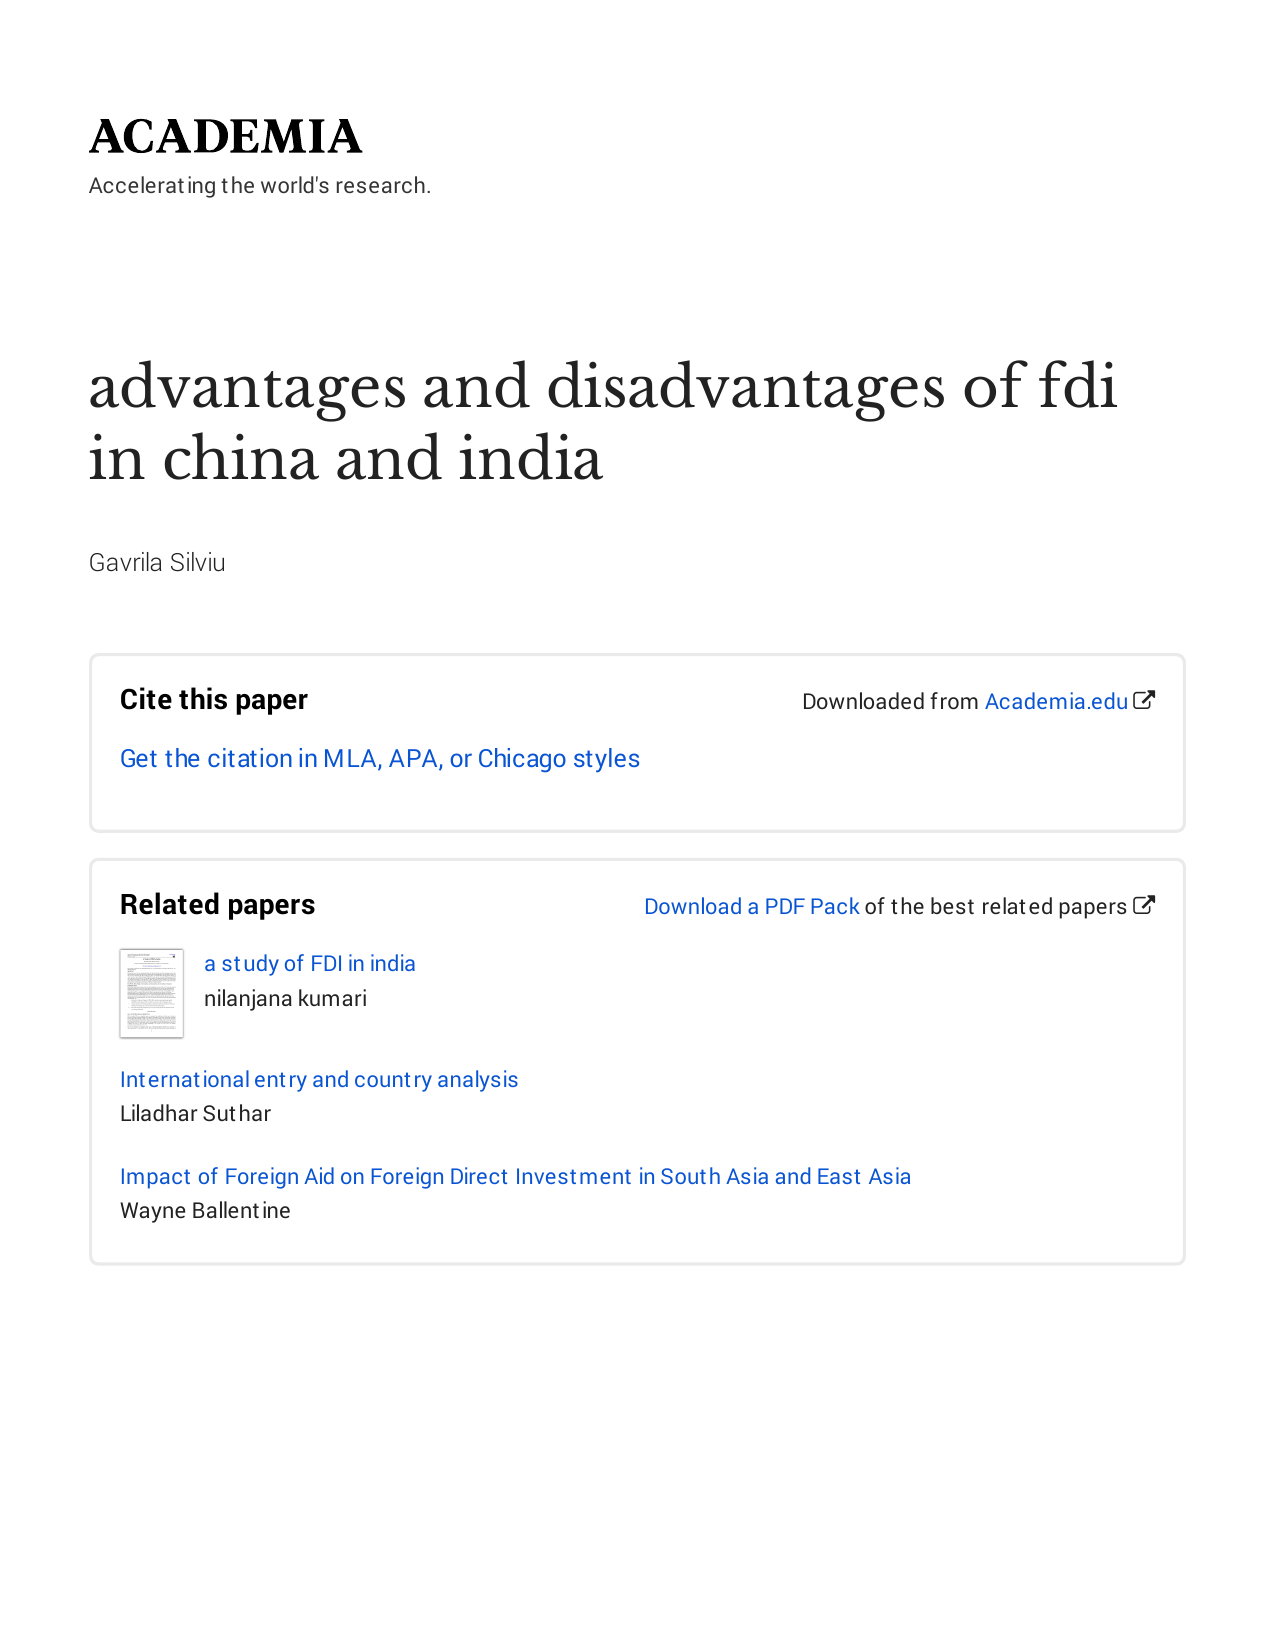 advantages and disadvantages of foreign aid pdf